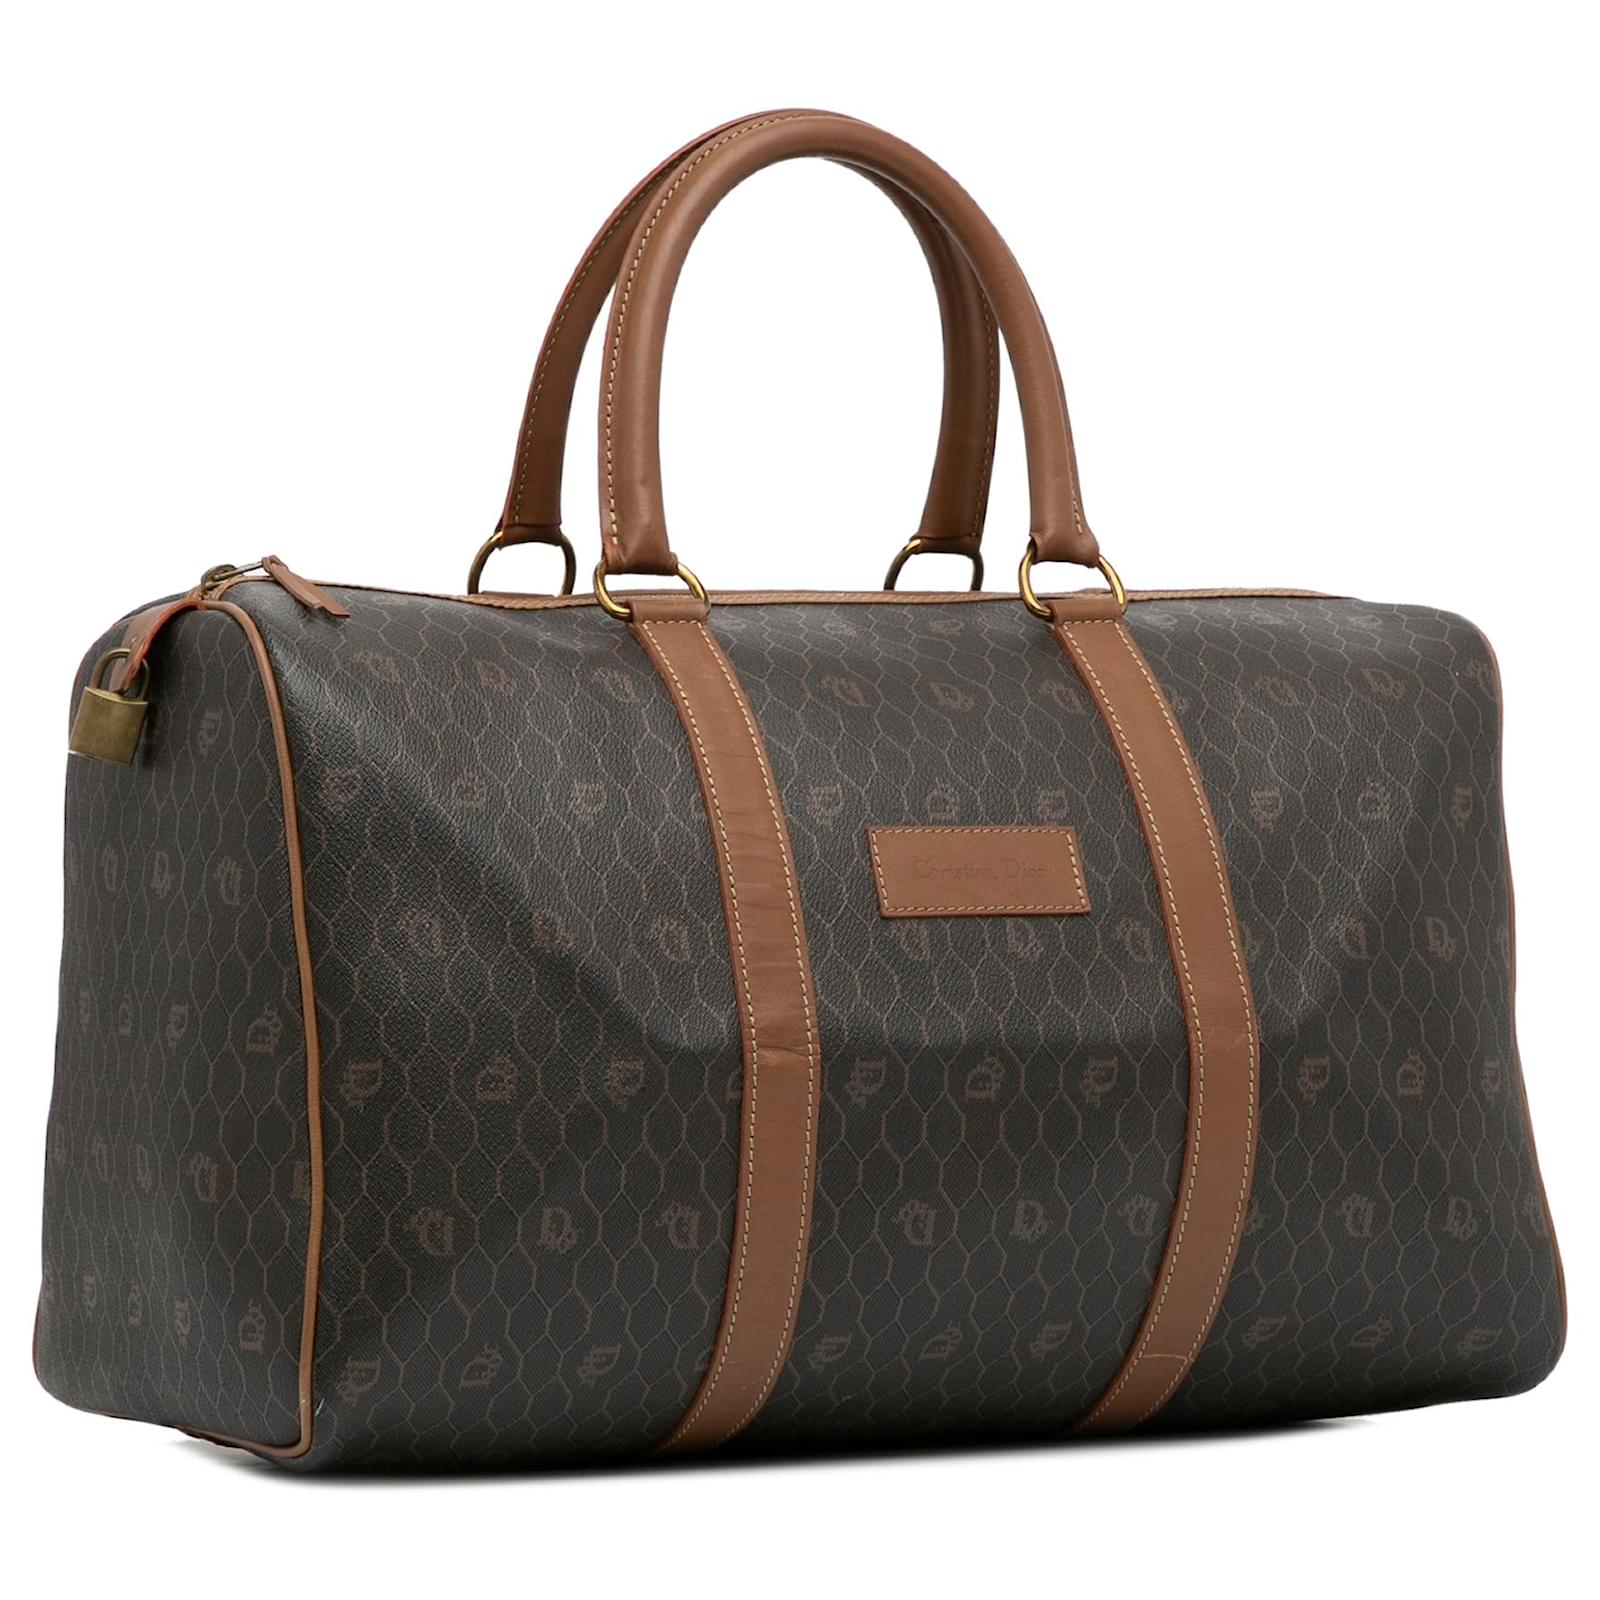 Christian Dior Honeycomb Duffle Bag - Brown Luggage and Travel